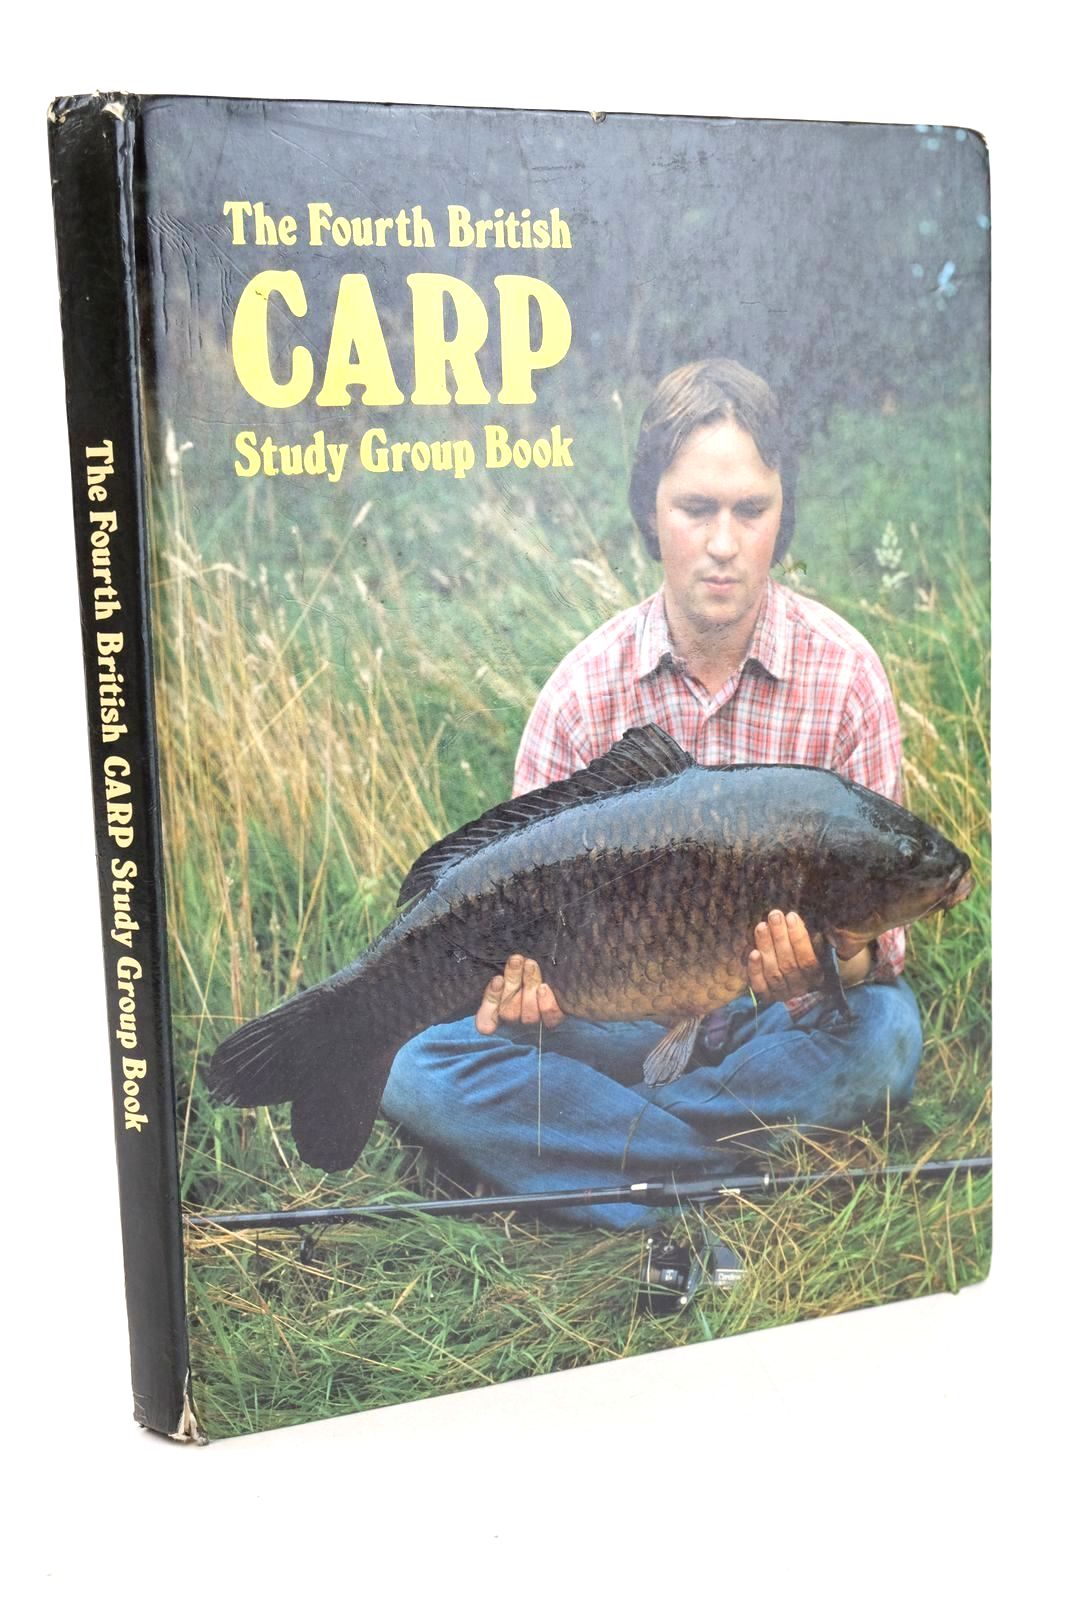 Photo of THE FOURTH BRITISH CARP STUDY GROUP BOOK written by Mohan, Peter Maddocks, Kevin illustrated by Gurd, Len Baker, John published by British Carp Study Group (STOCK CODE: 1327565)  for sale by Stella & Rose's Books